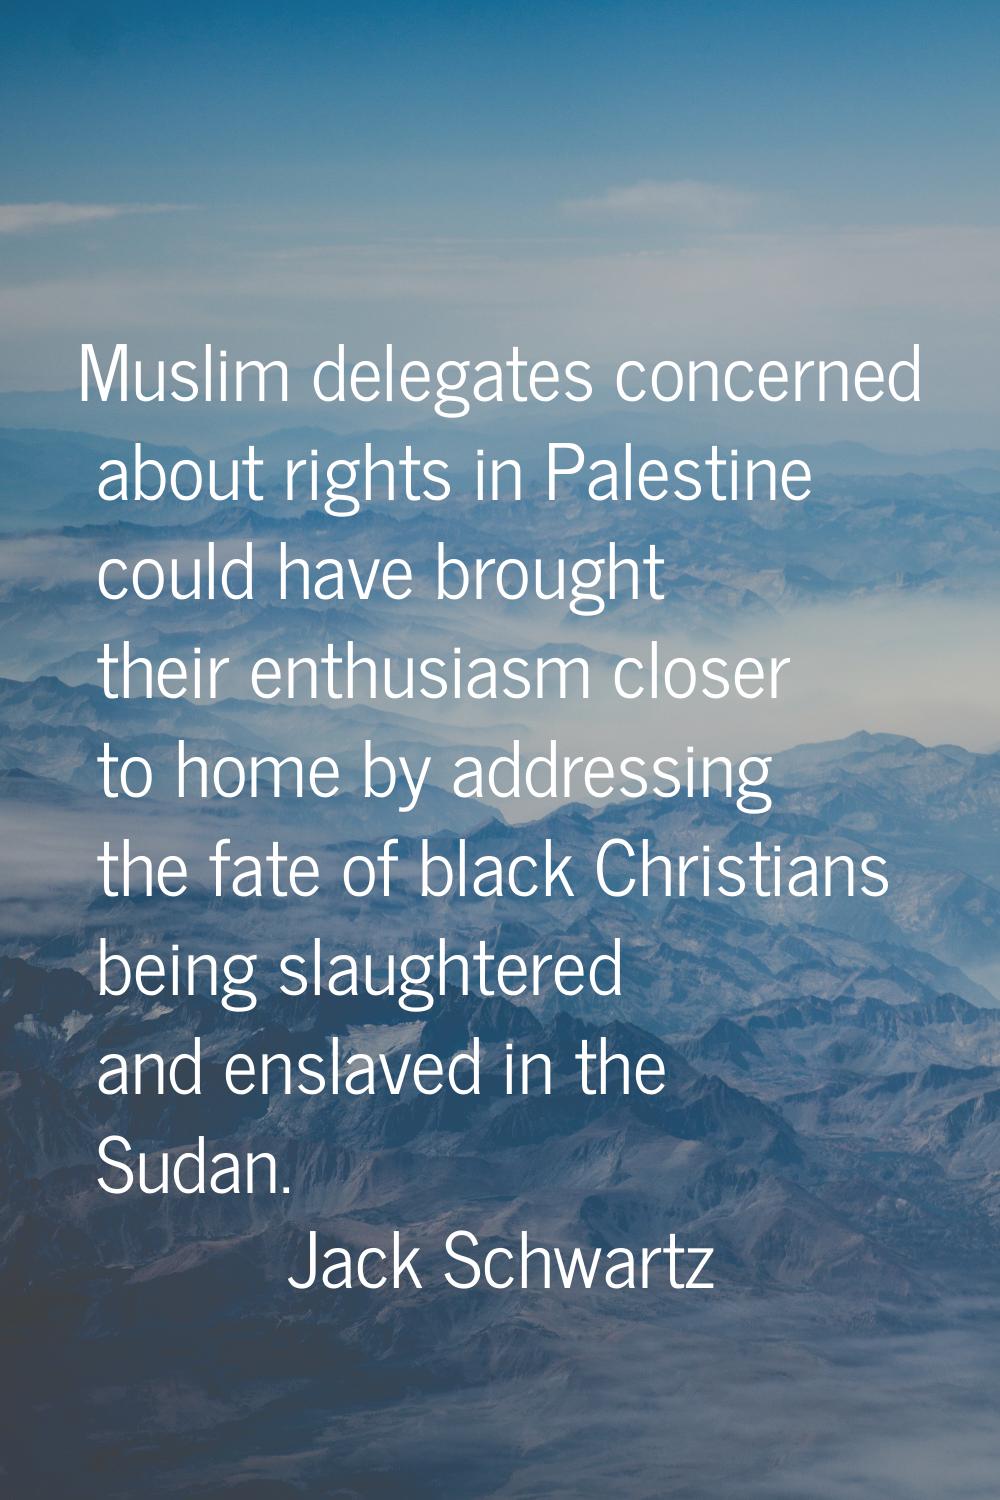 Muslim delegates concerned about rights in Palestine could have brought their enthusiasm closer to 